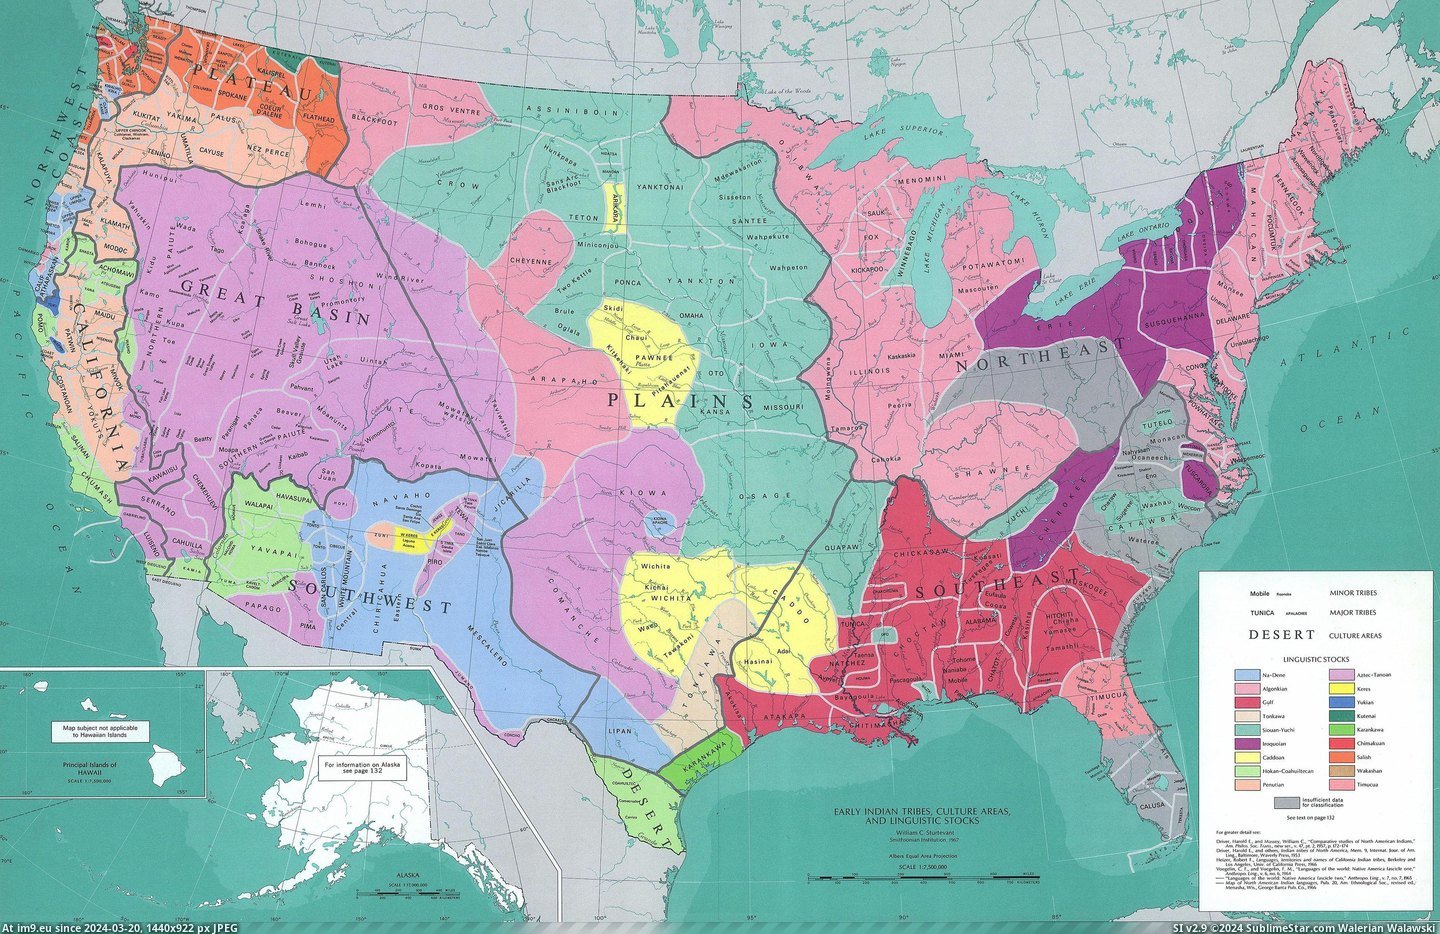 #Early #Americans #Native #Usa [Mapporn] Early Localizations - Native Americans - USA [3850x2476] Pic. (Изображение из альбом My r/MAPS favs))